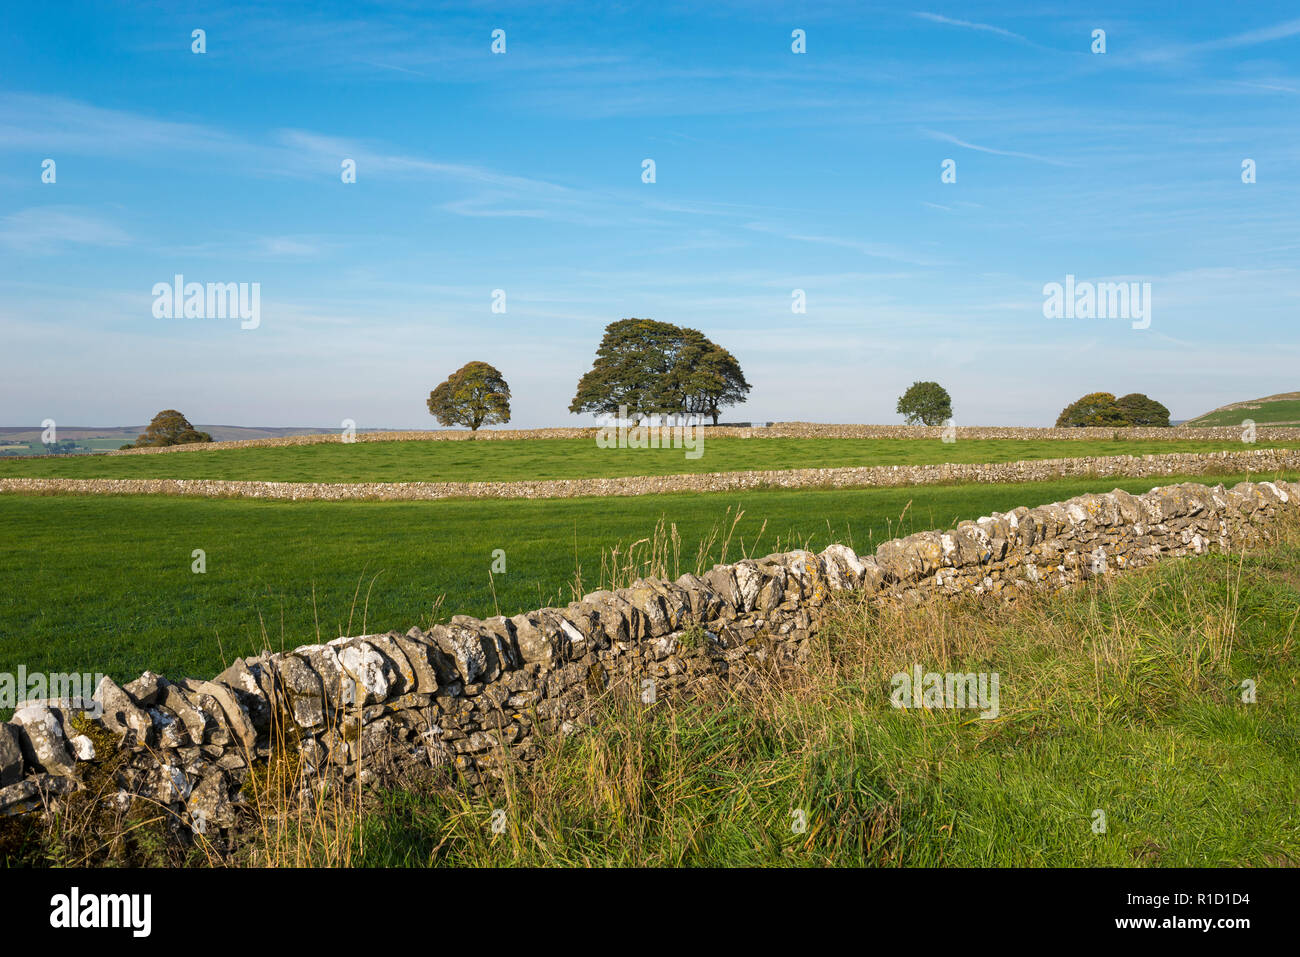 Countryside in the White Peak area of the Peak District near Buxton, Derbyshire, England. Limestone walls a characteristic of the area. Stock Photo